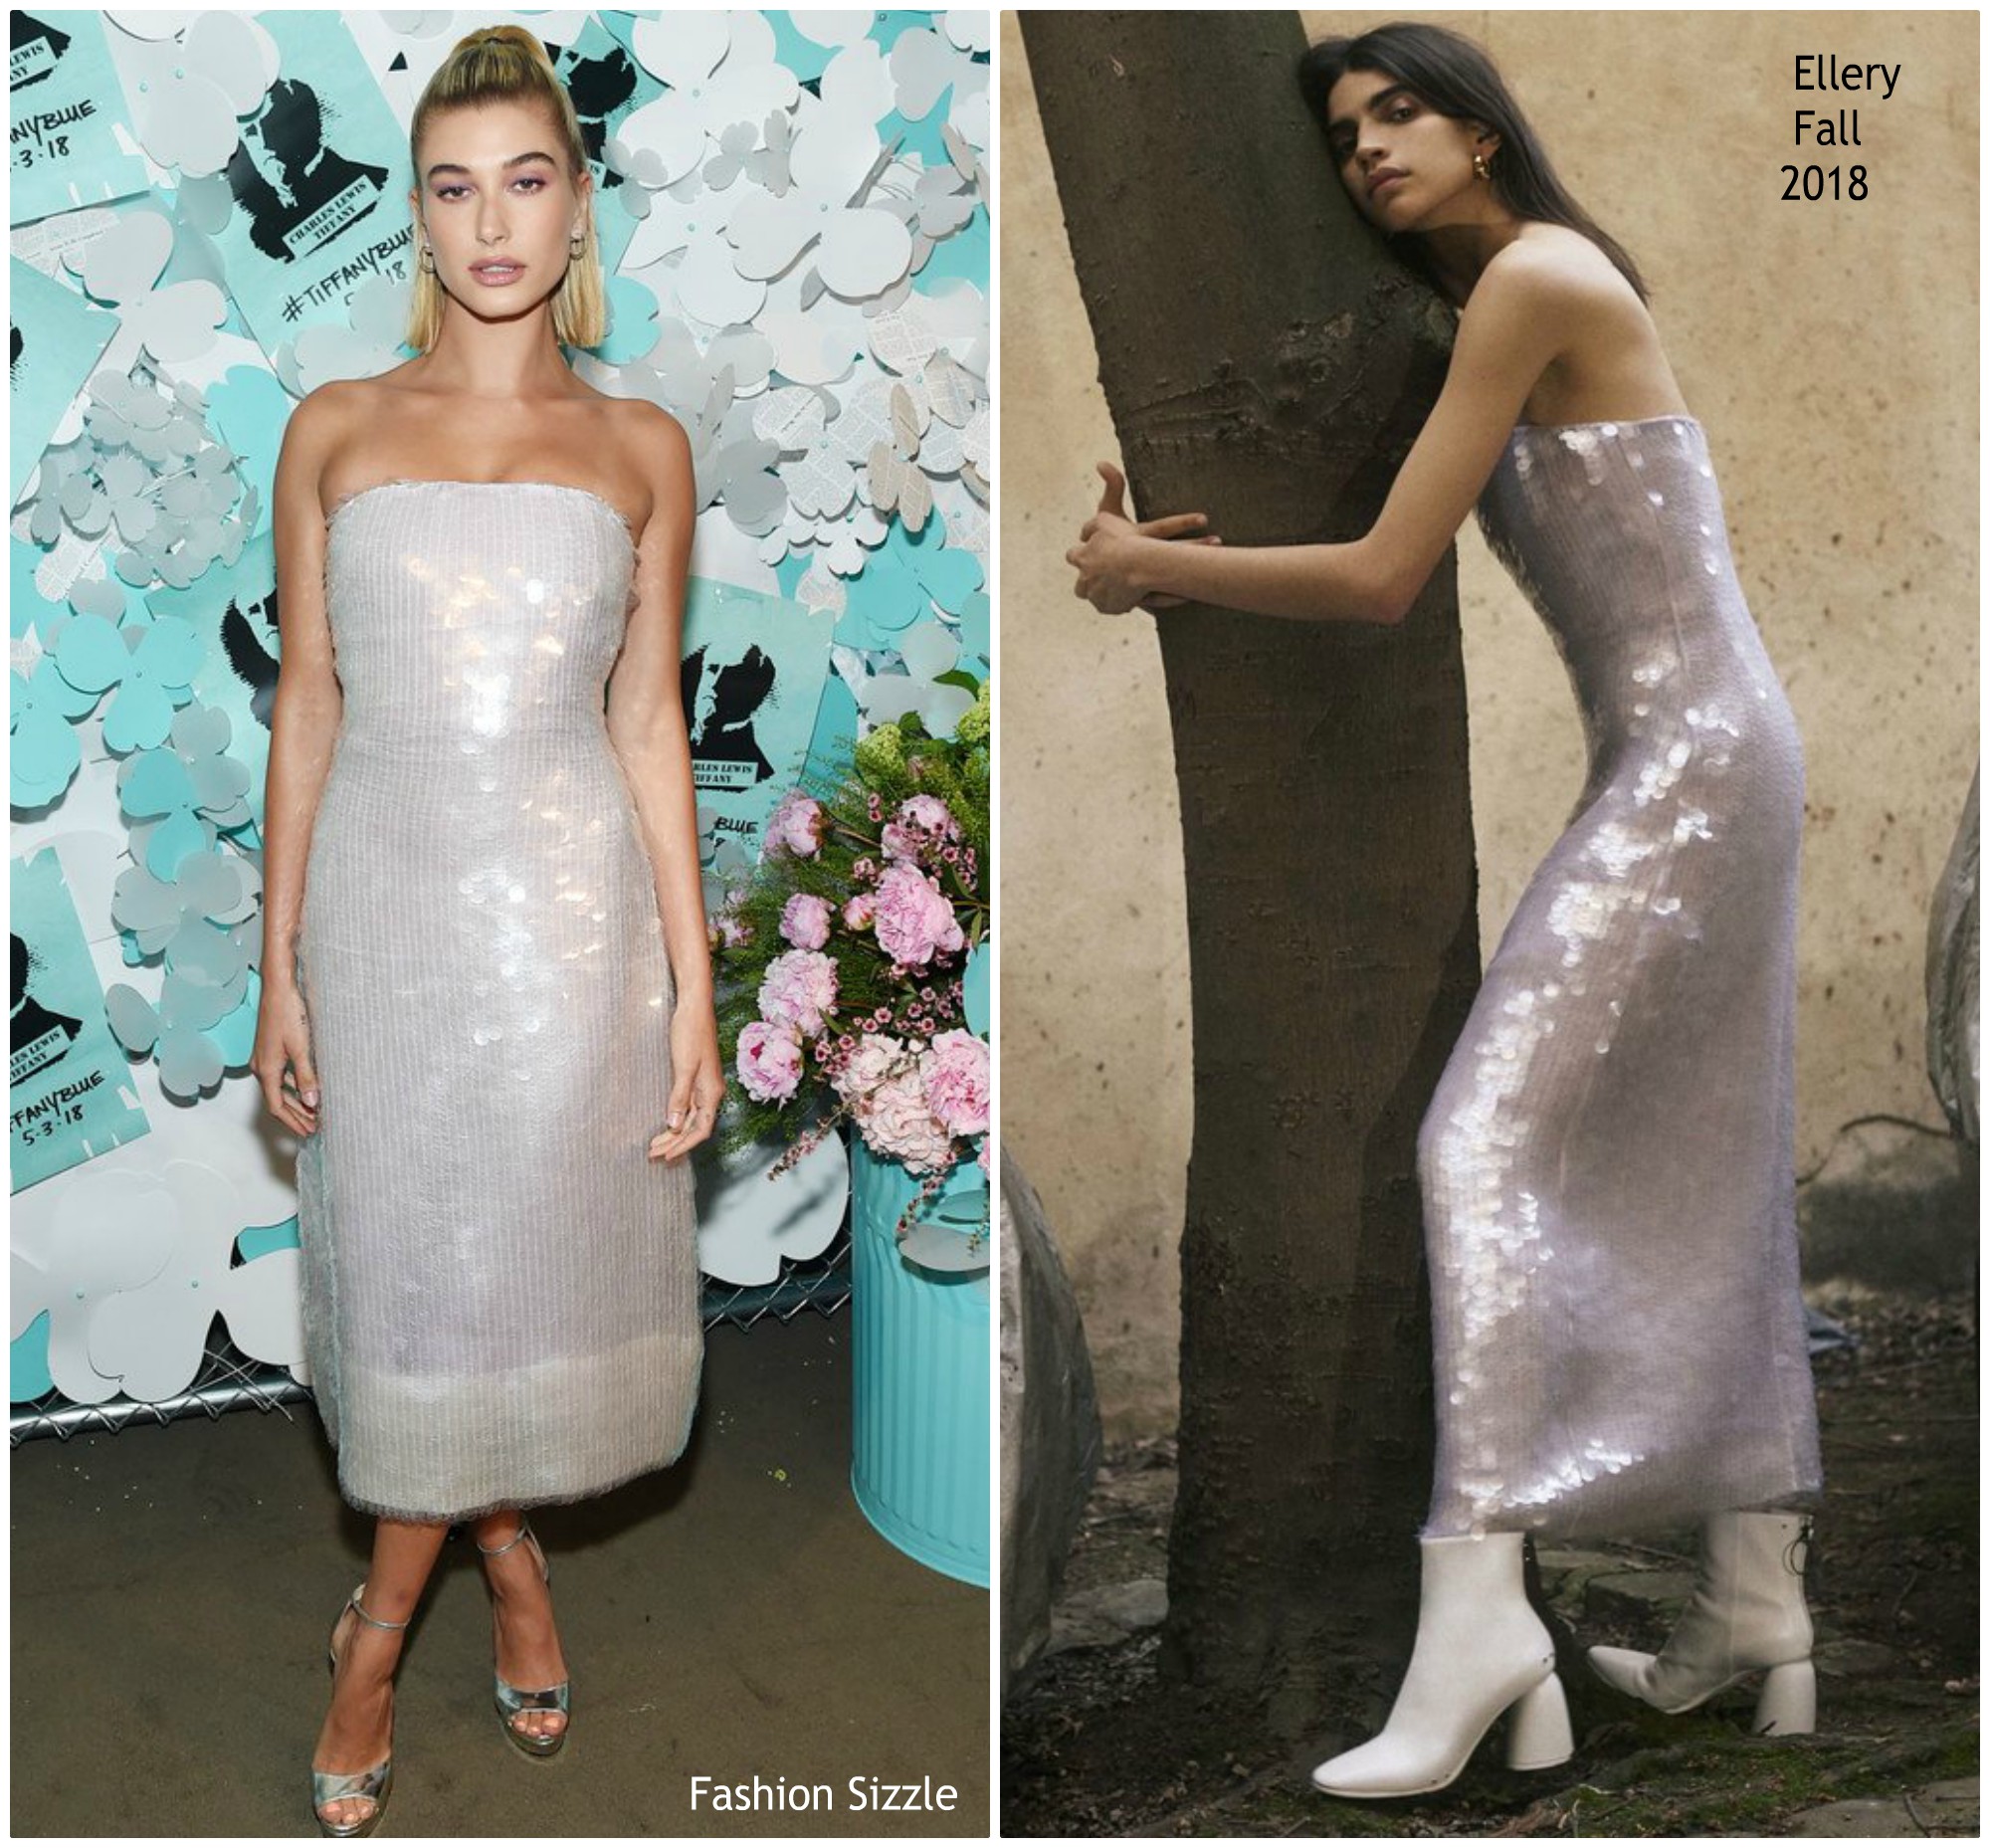 hailey-baldwin-in-ellery-tiffany-co-paper-flowers-event-and-believe-in-dreams-campaign-launch-